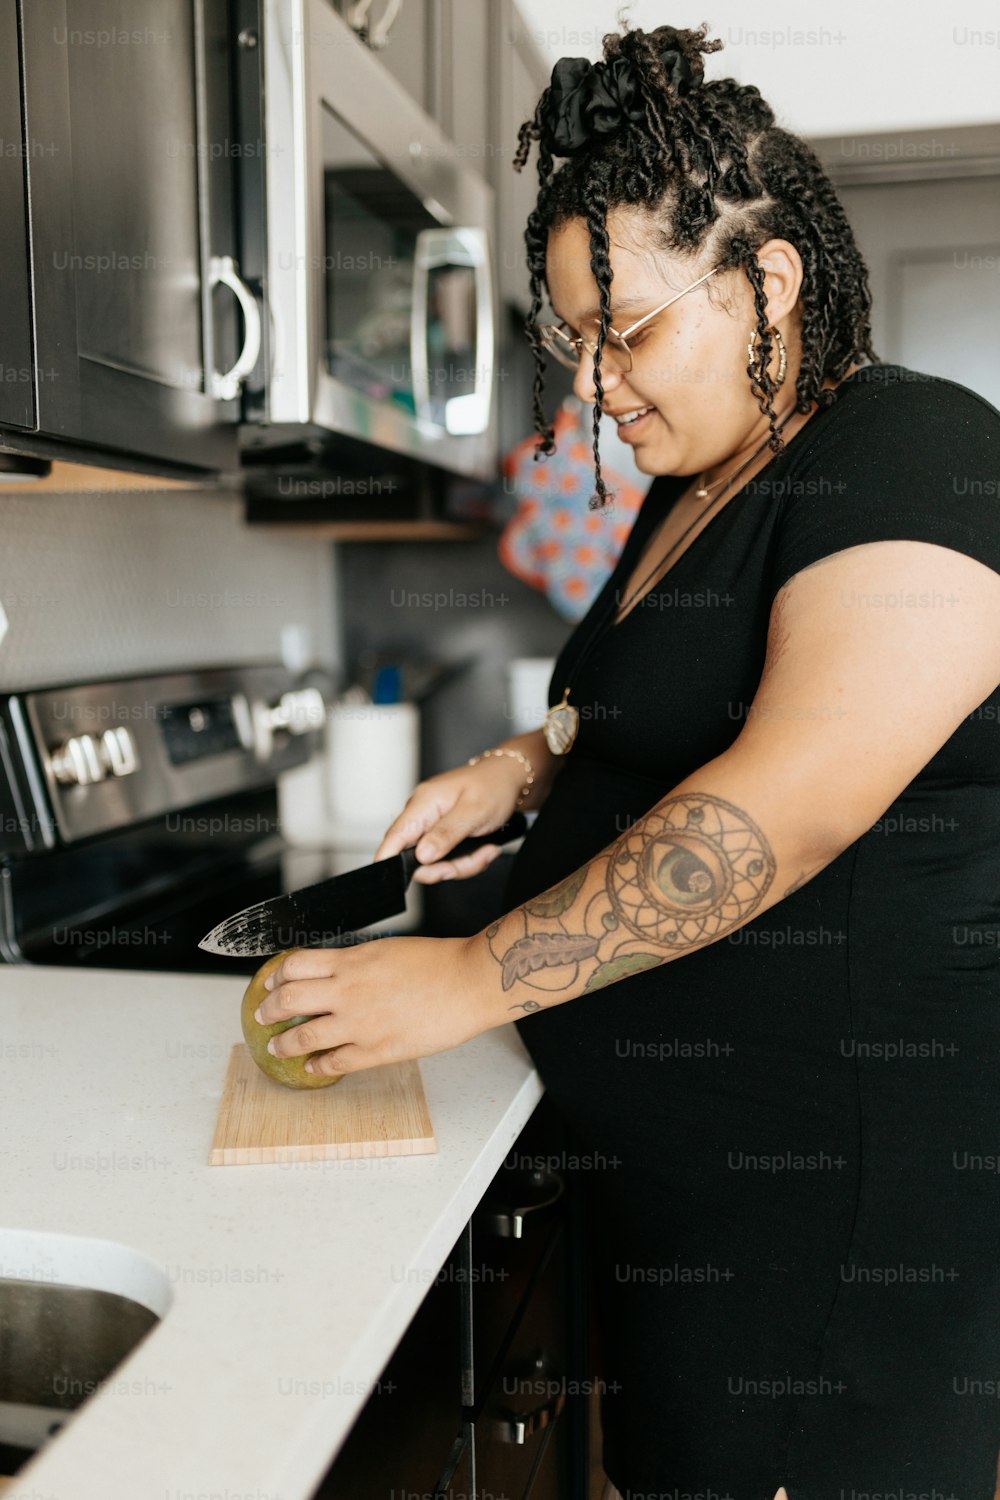 a woman standing in a kitchen cutting up food